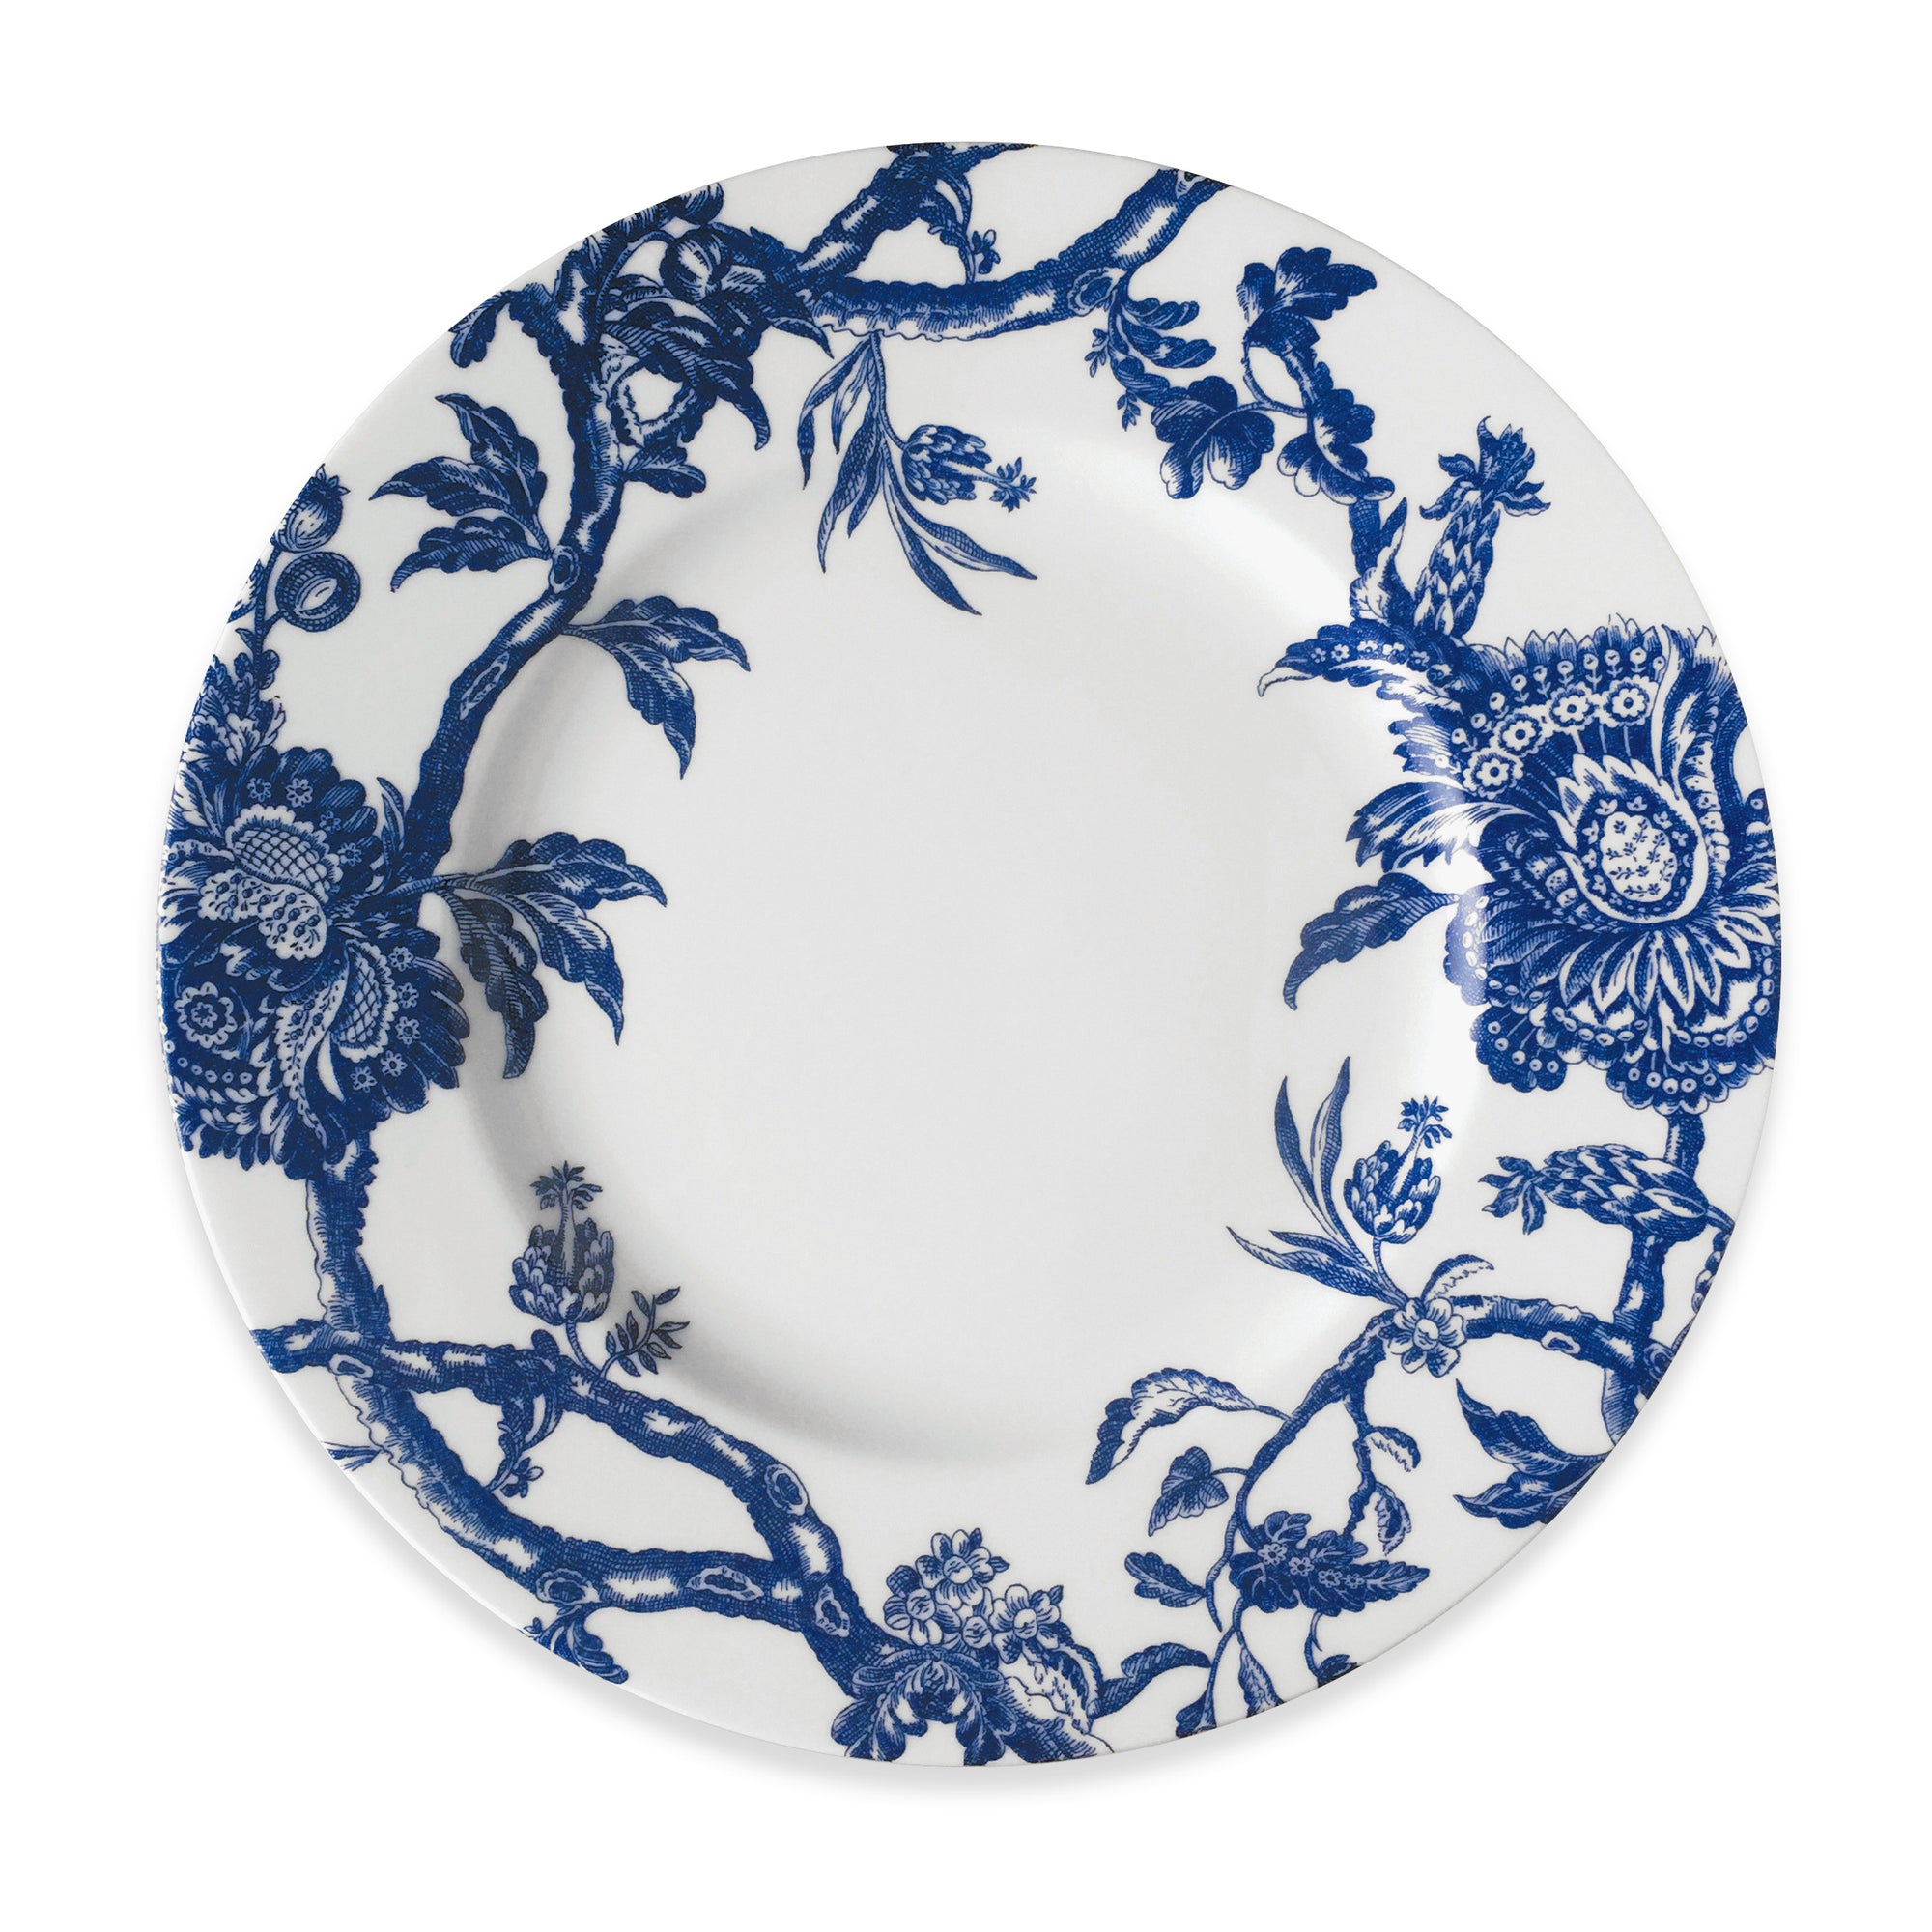 A premium porcelain dinnerware piece, the Arcadia Rimmed Dinner Plate by Caskata Artisanal Home is adorned with intricate graphic florals along the rim, inspired by the Williamsburg Foundation.